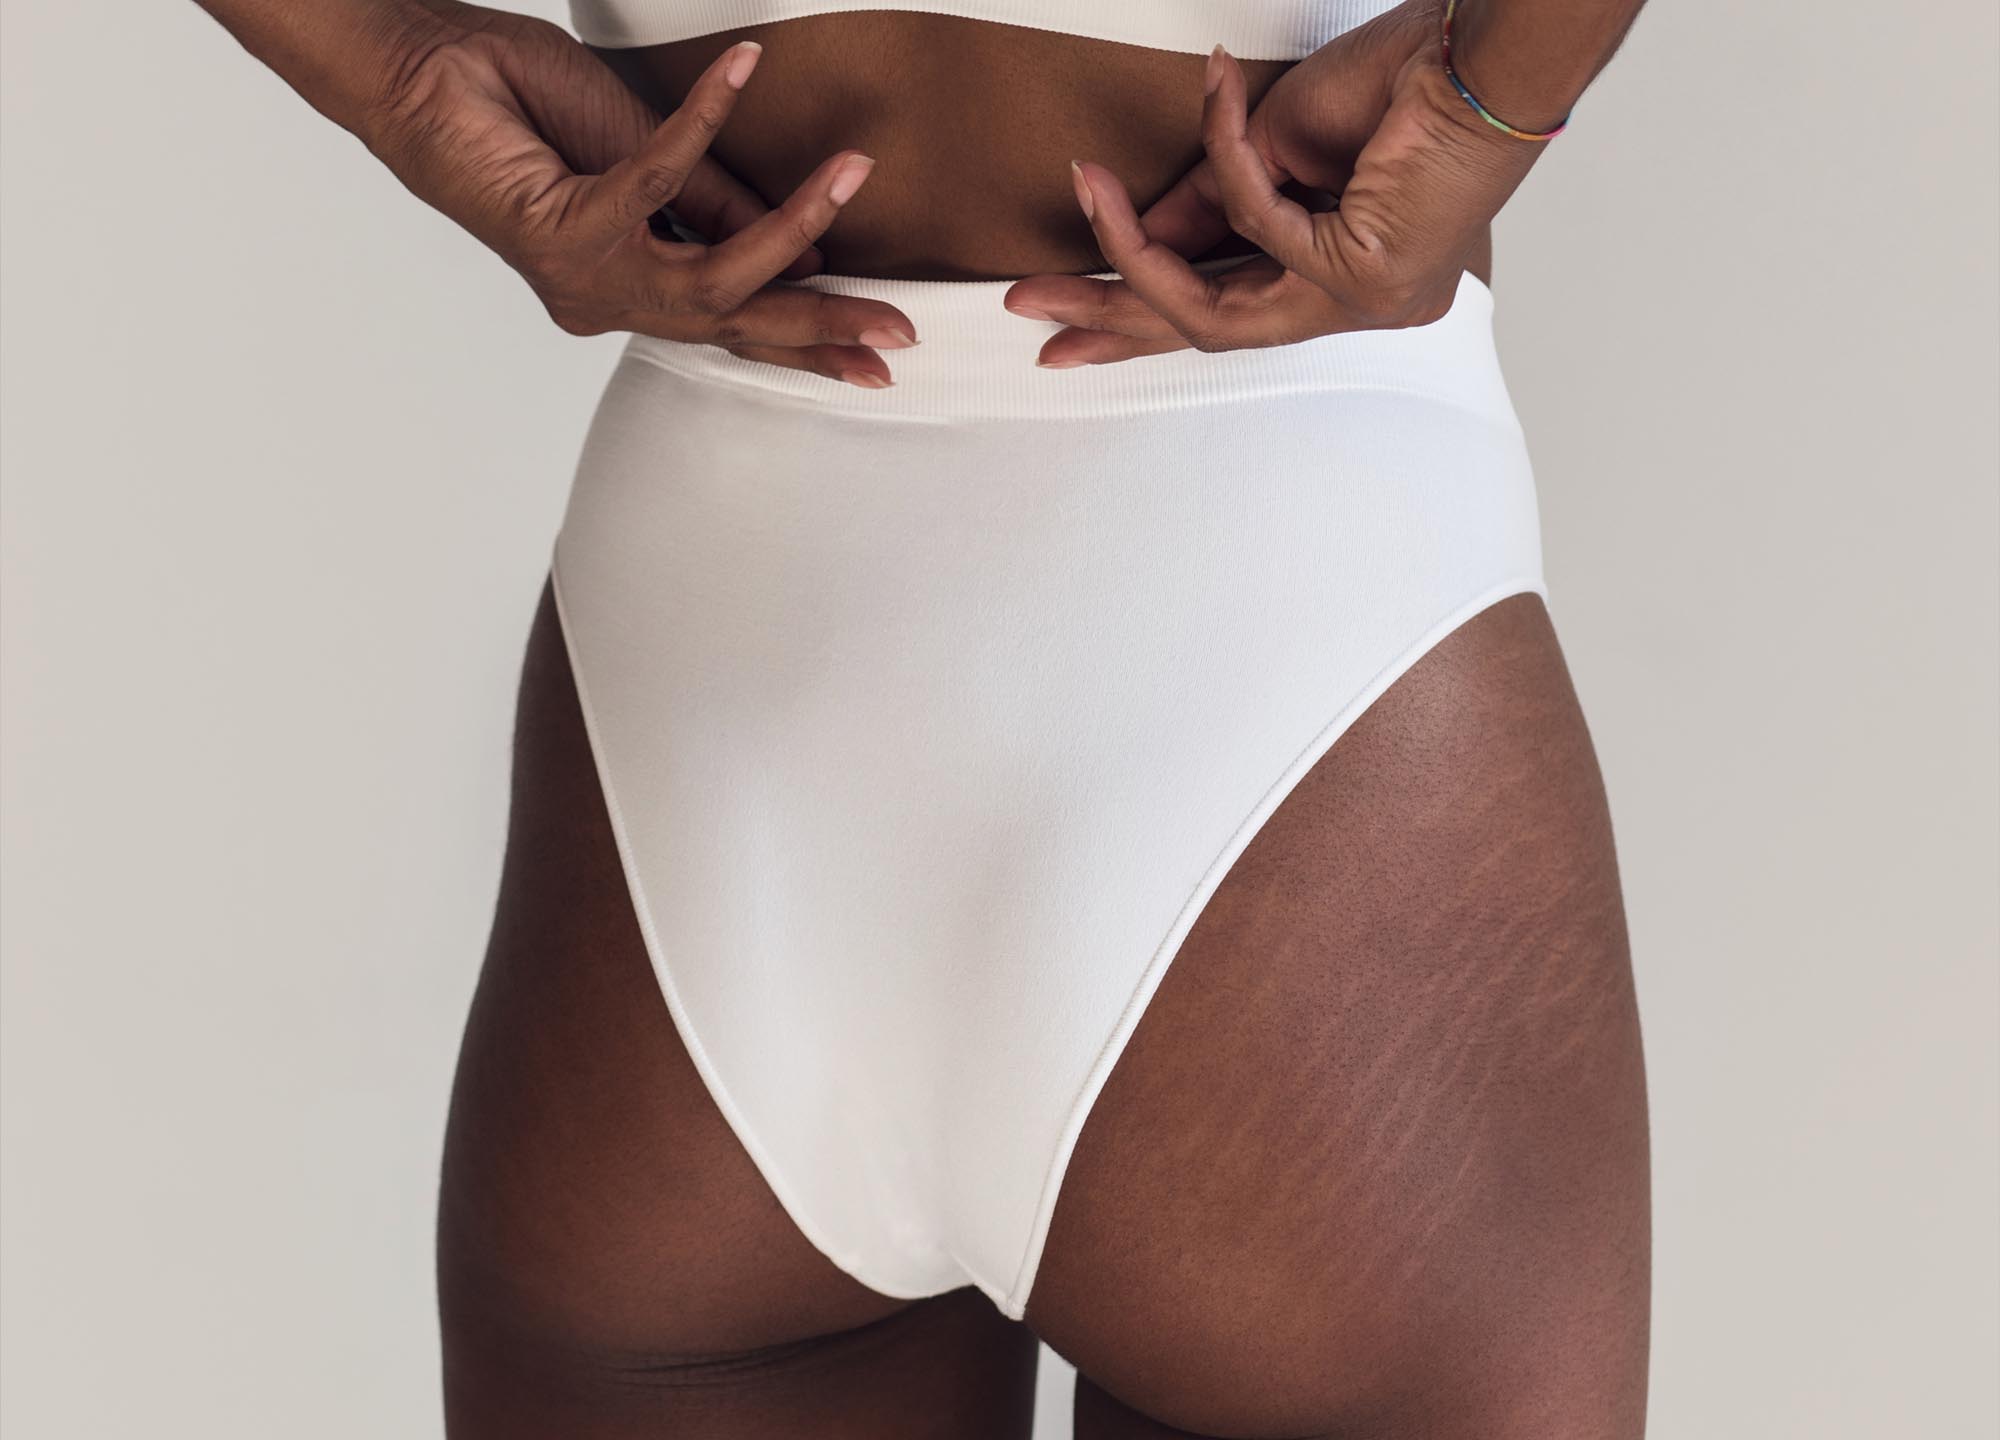 Everything you need to know about a thread butt lift and the derriere-enhancing results it can—and can’t—deliver.